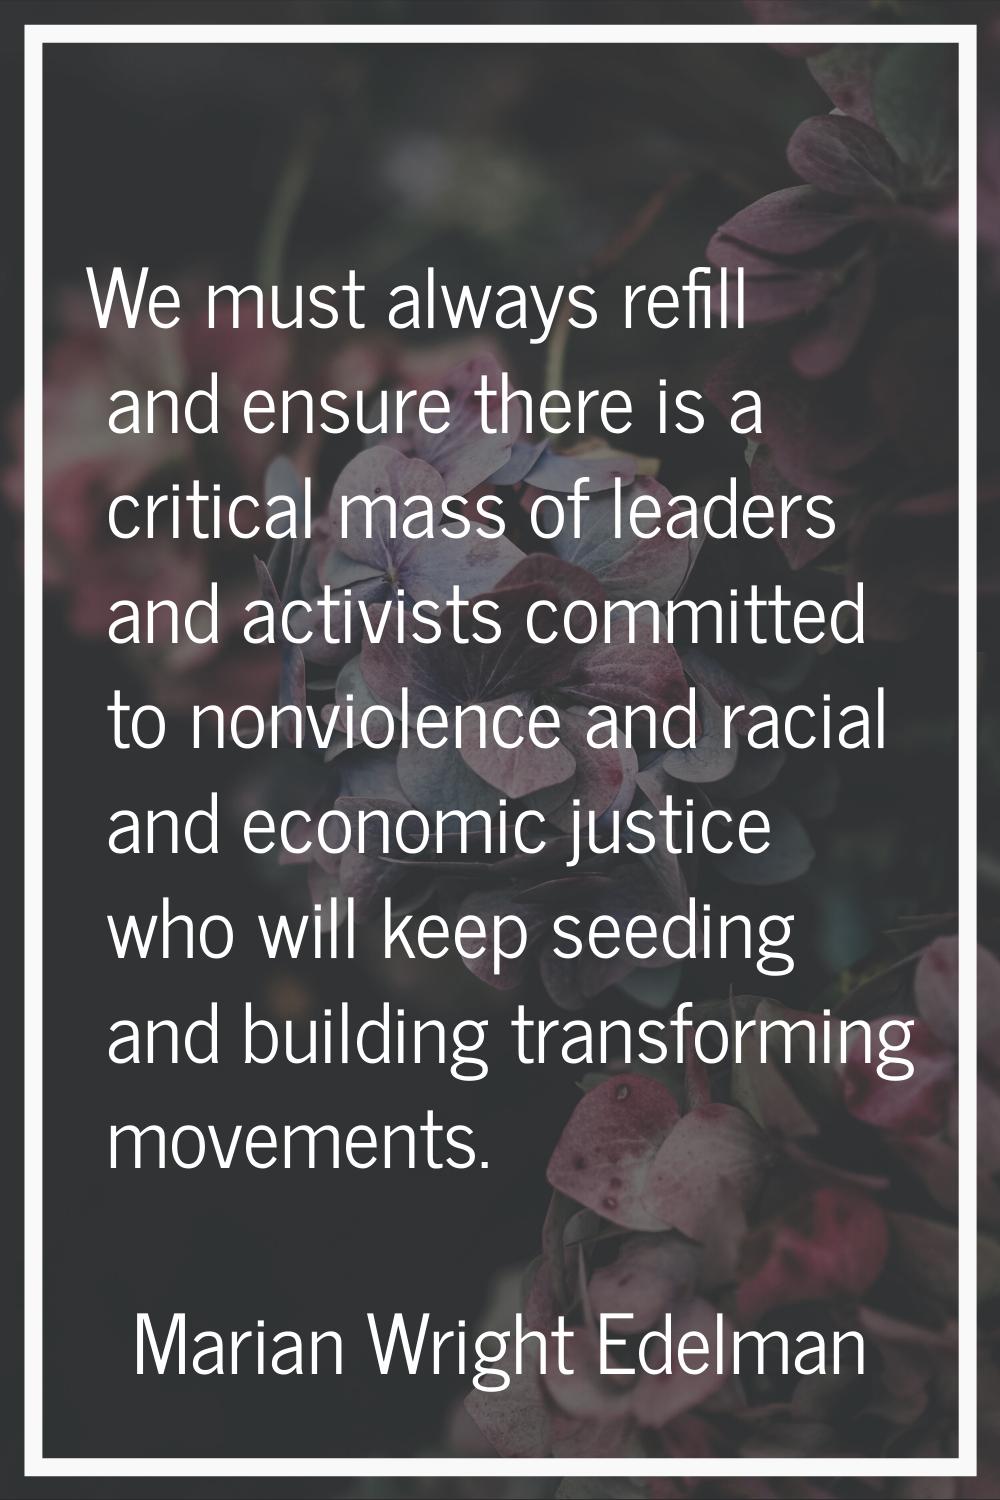 We must always refill and ensure there is a critical mass of leaders and activists committed to non